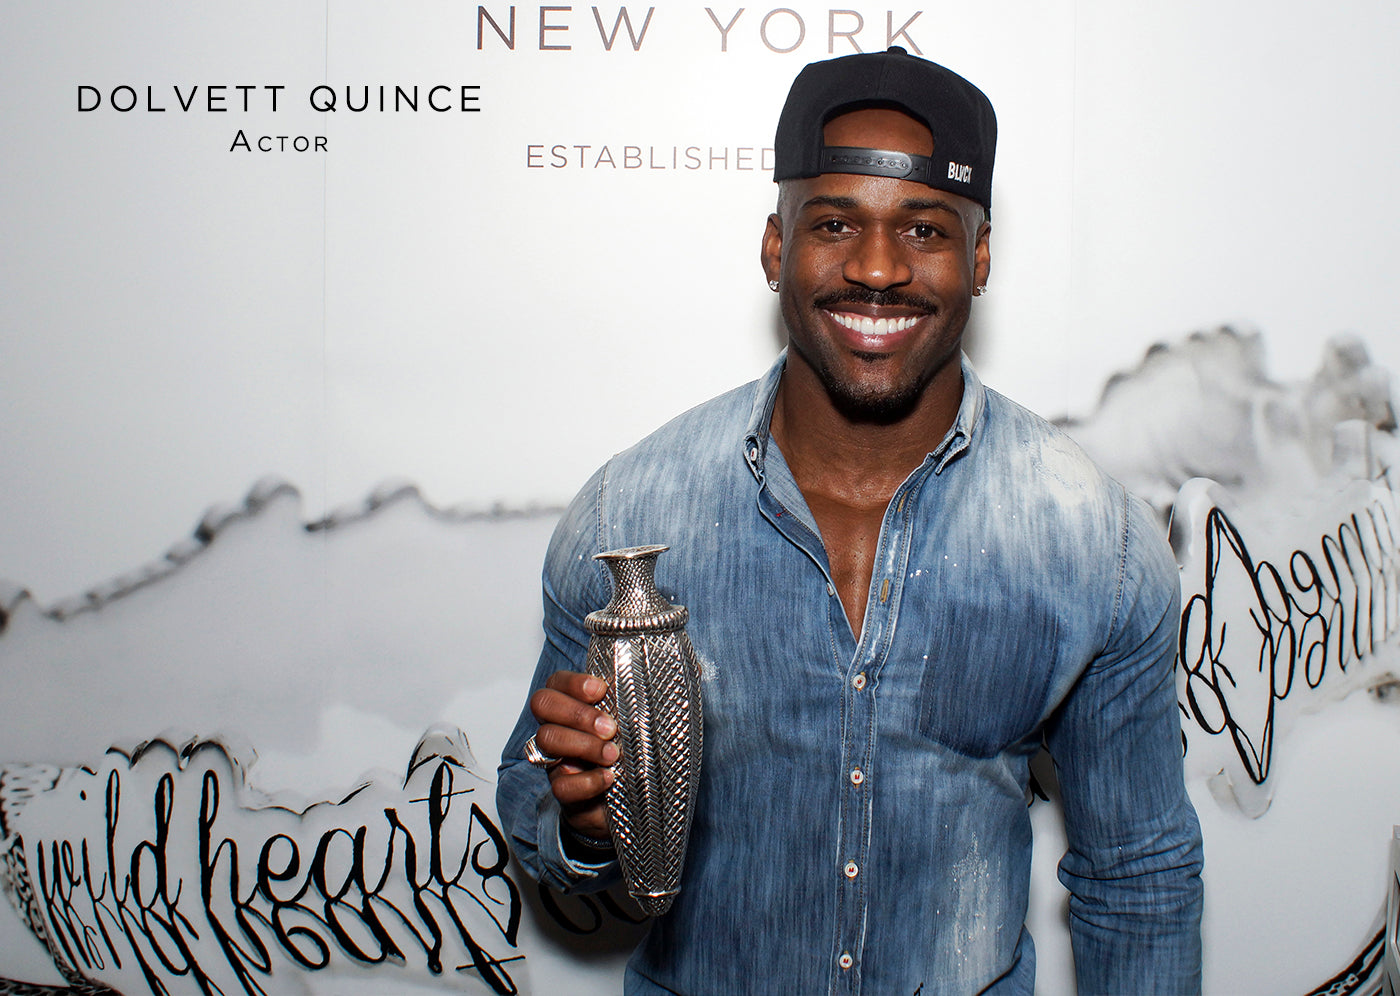 Dolvett Quince fashion style